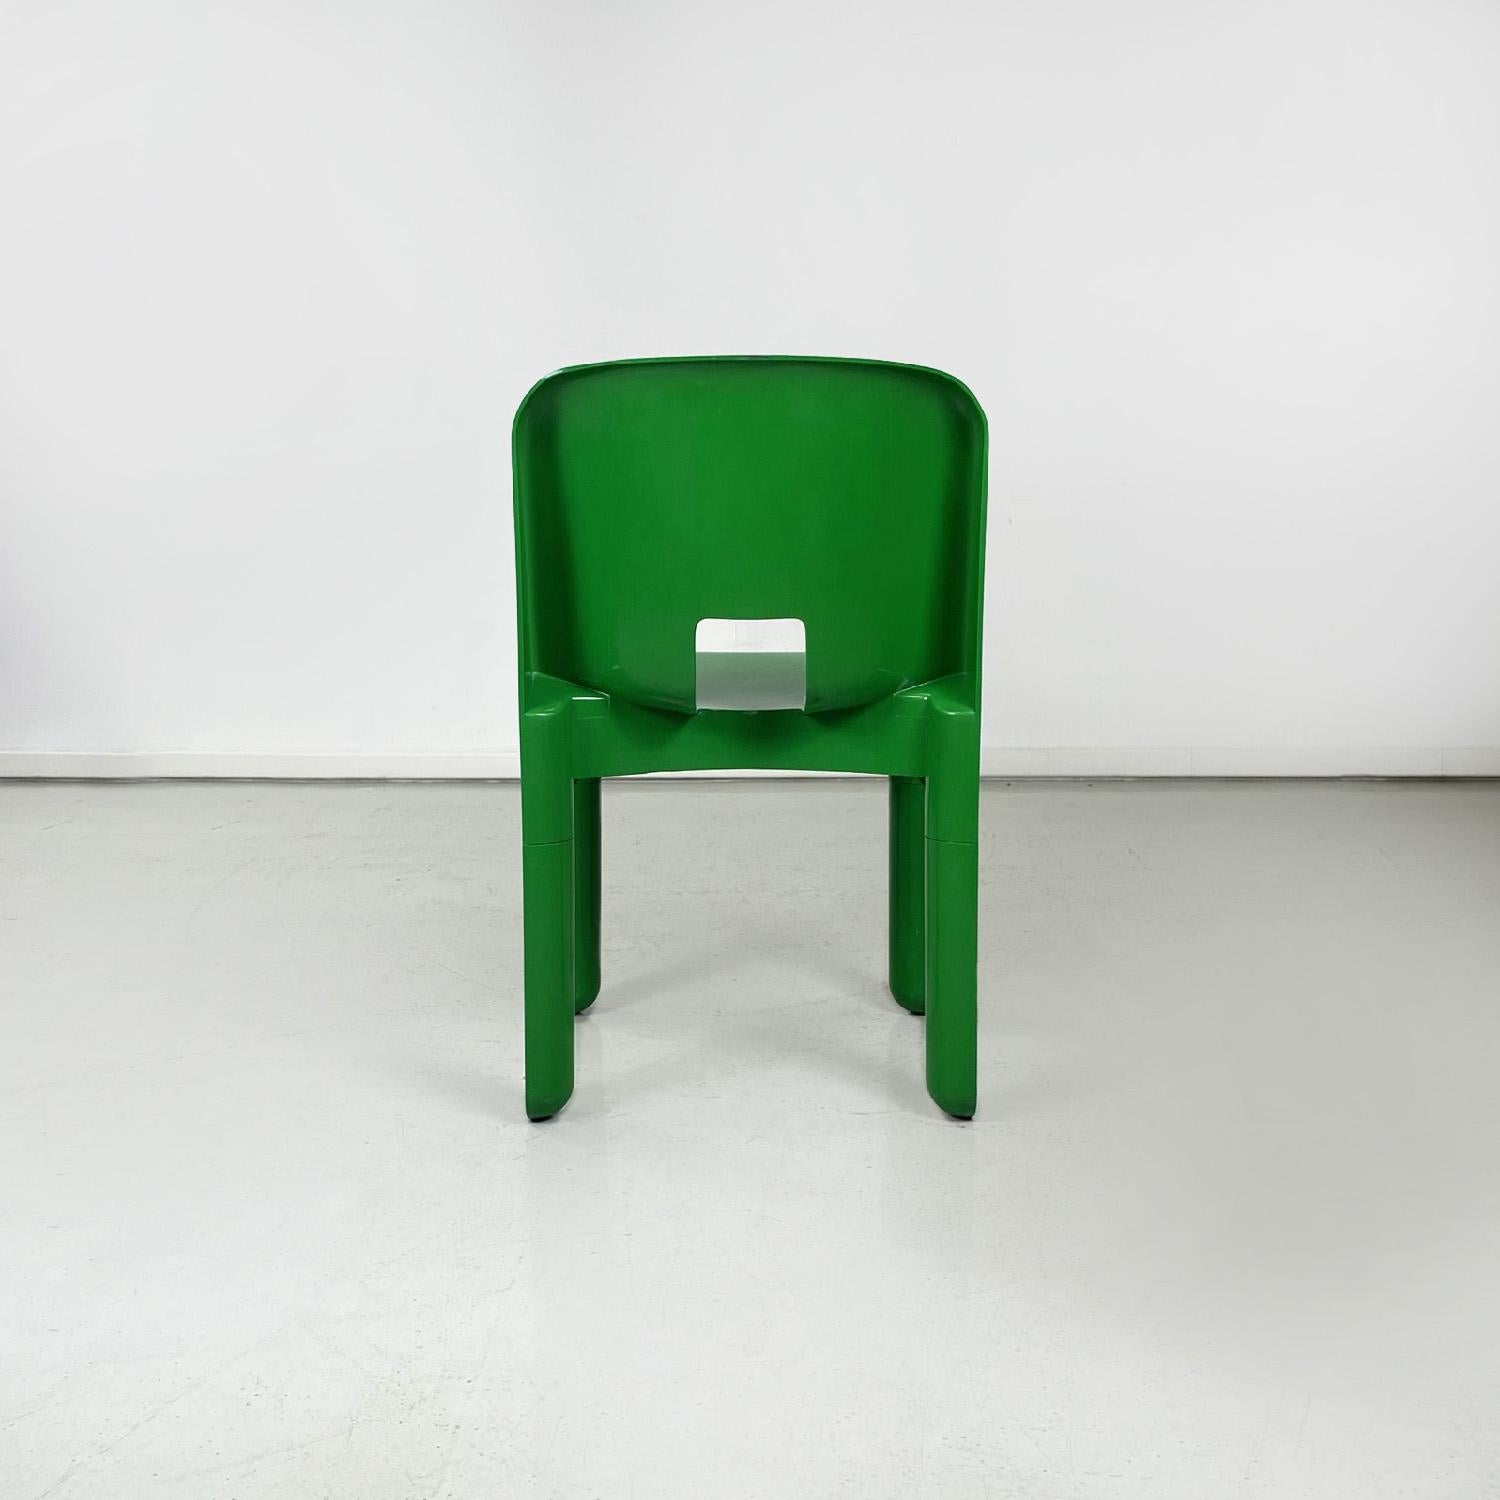 Late 20th Century Italian modern green Chairs 4868 Universal Chair by Joe Colombo Kartell, 1970s For Sale